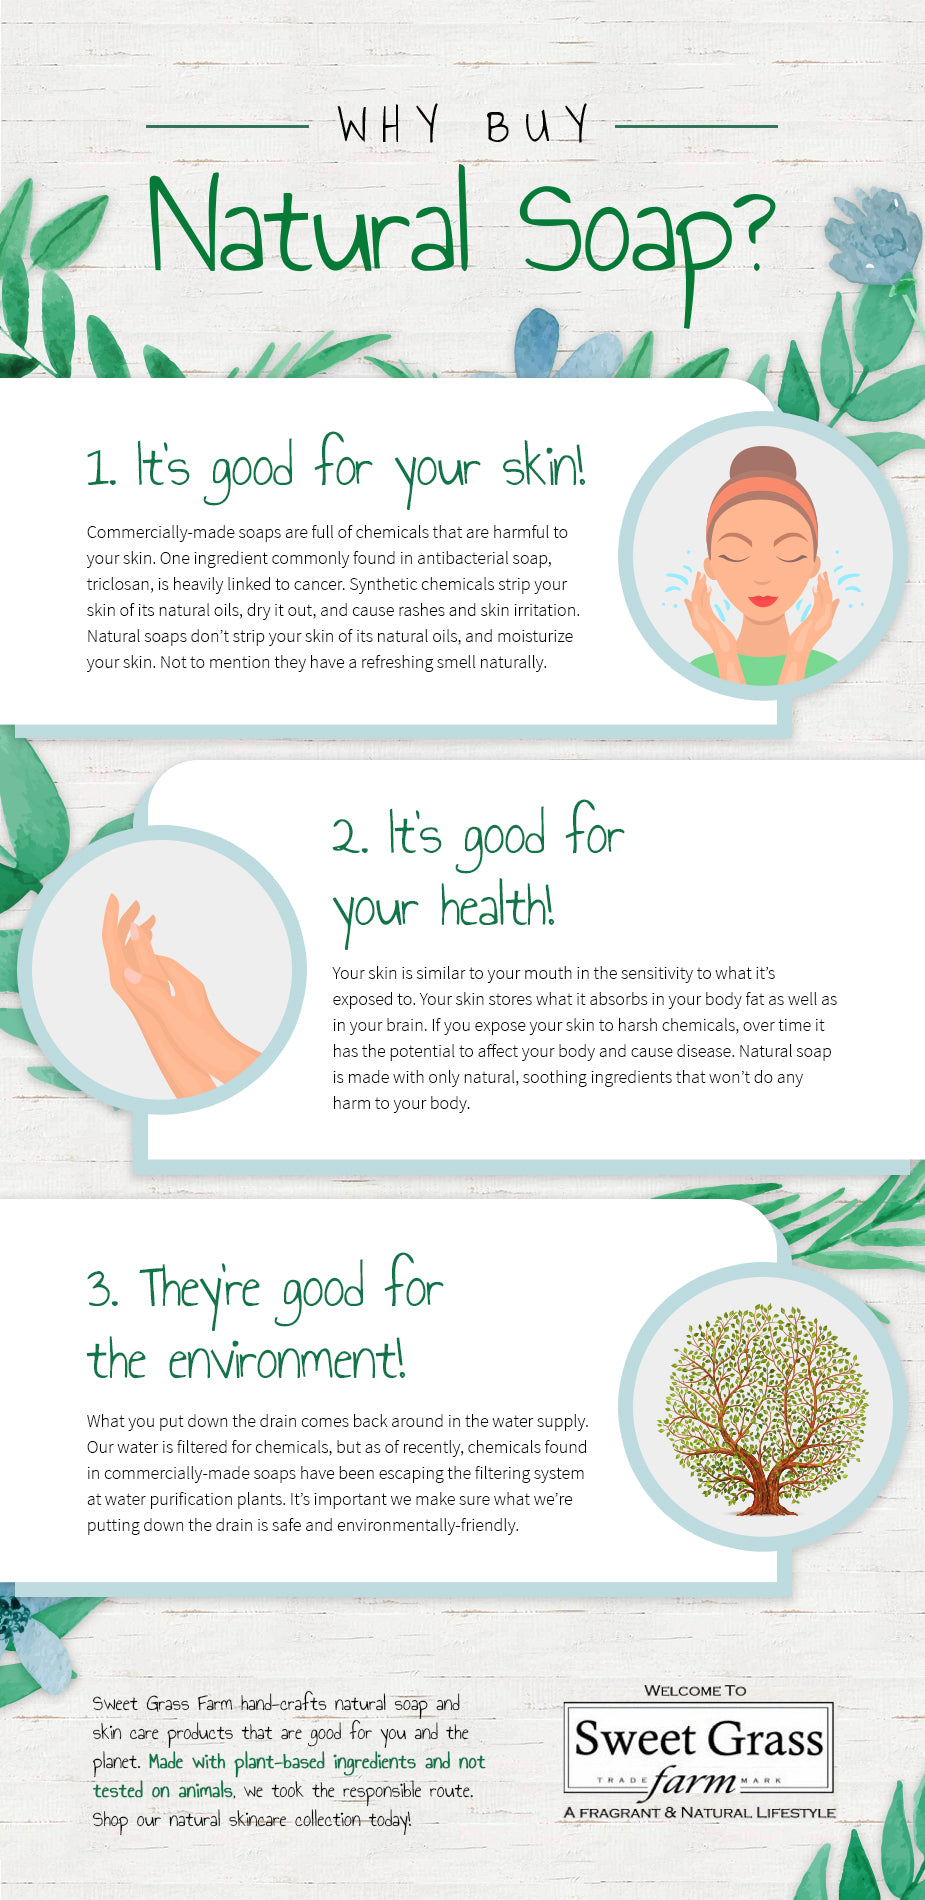 Reasons to Buy Natural Infographic